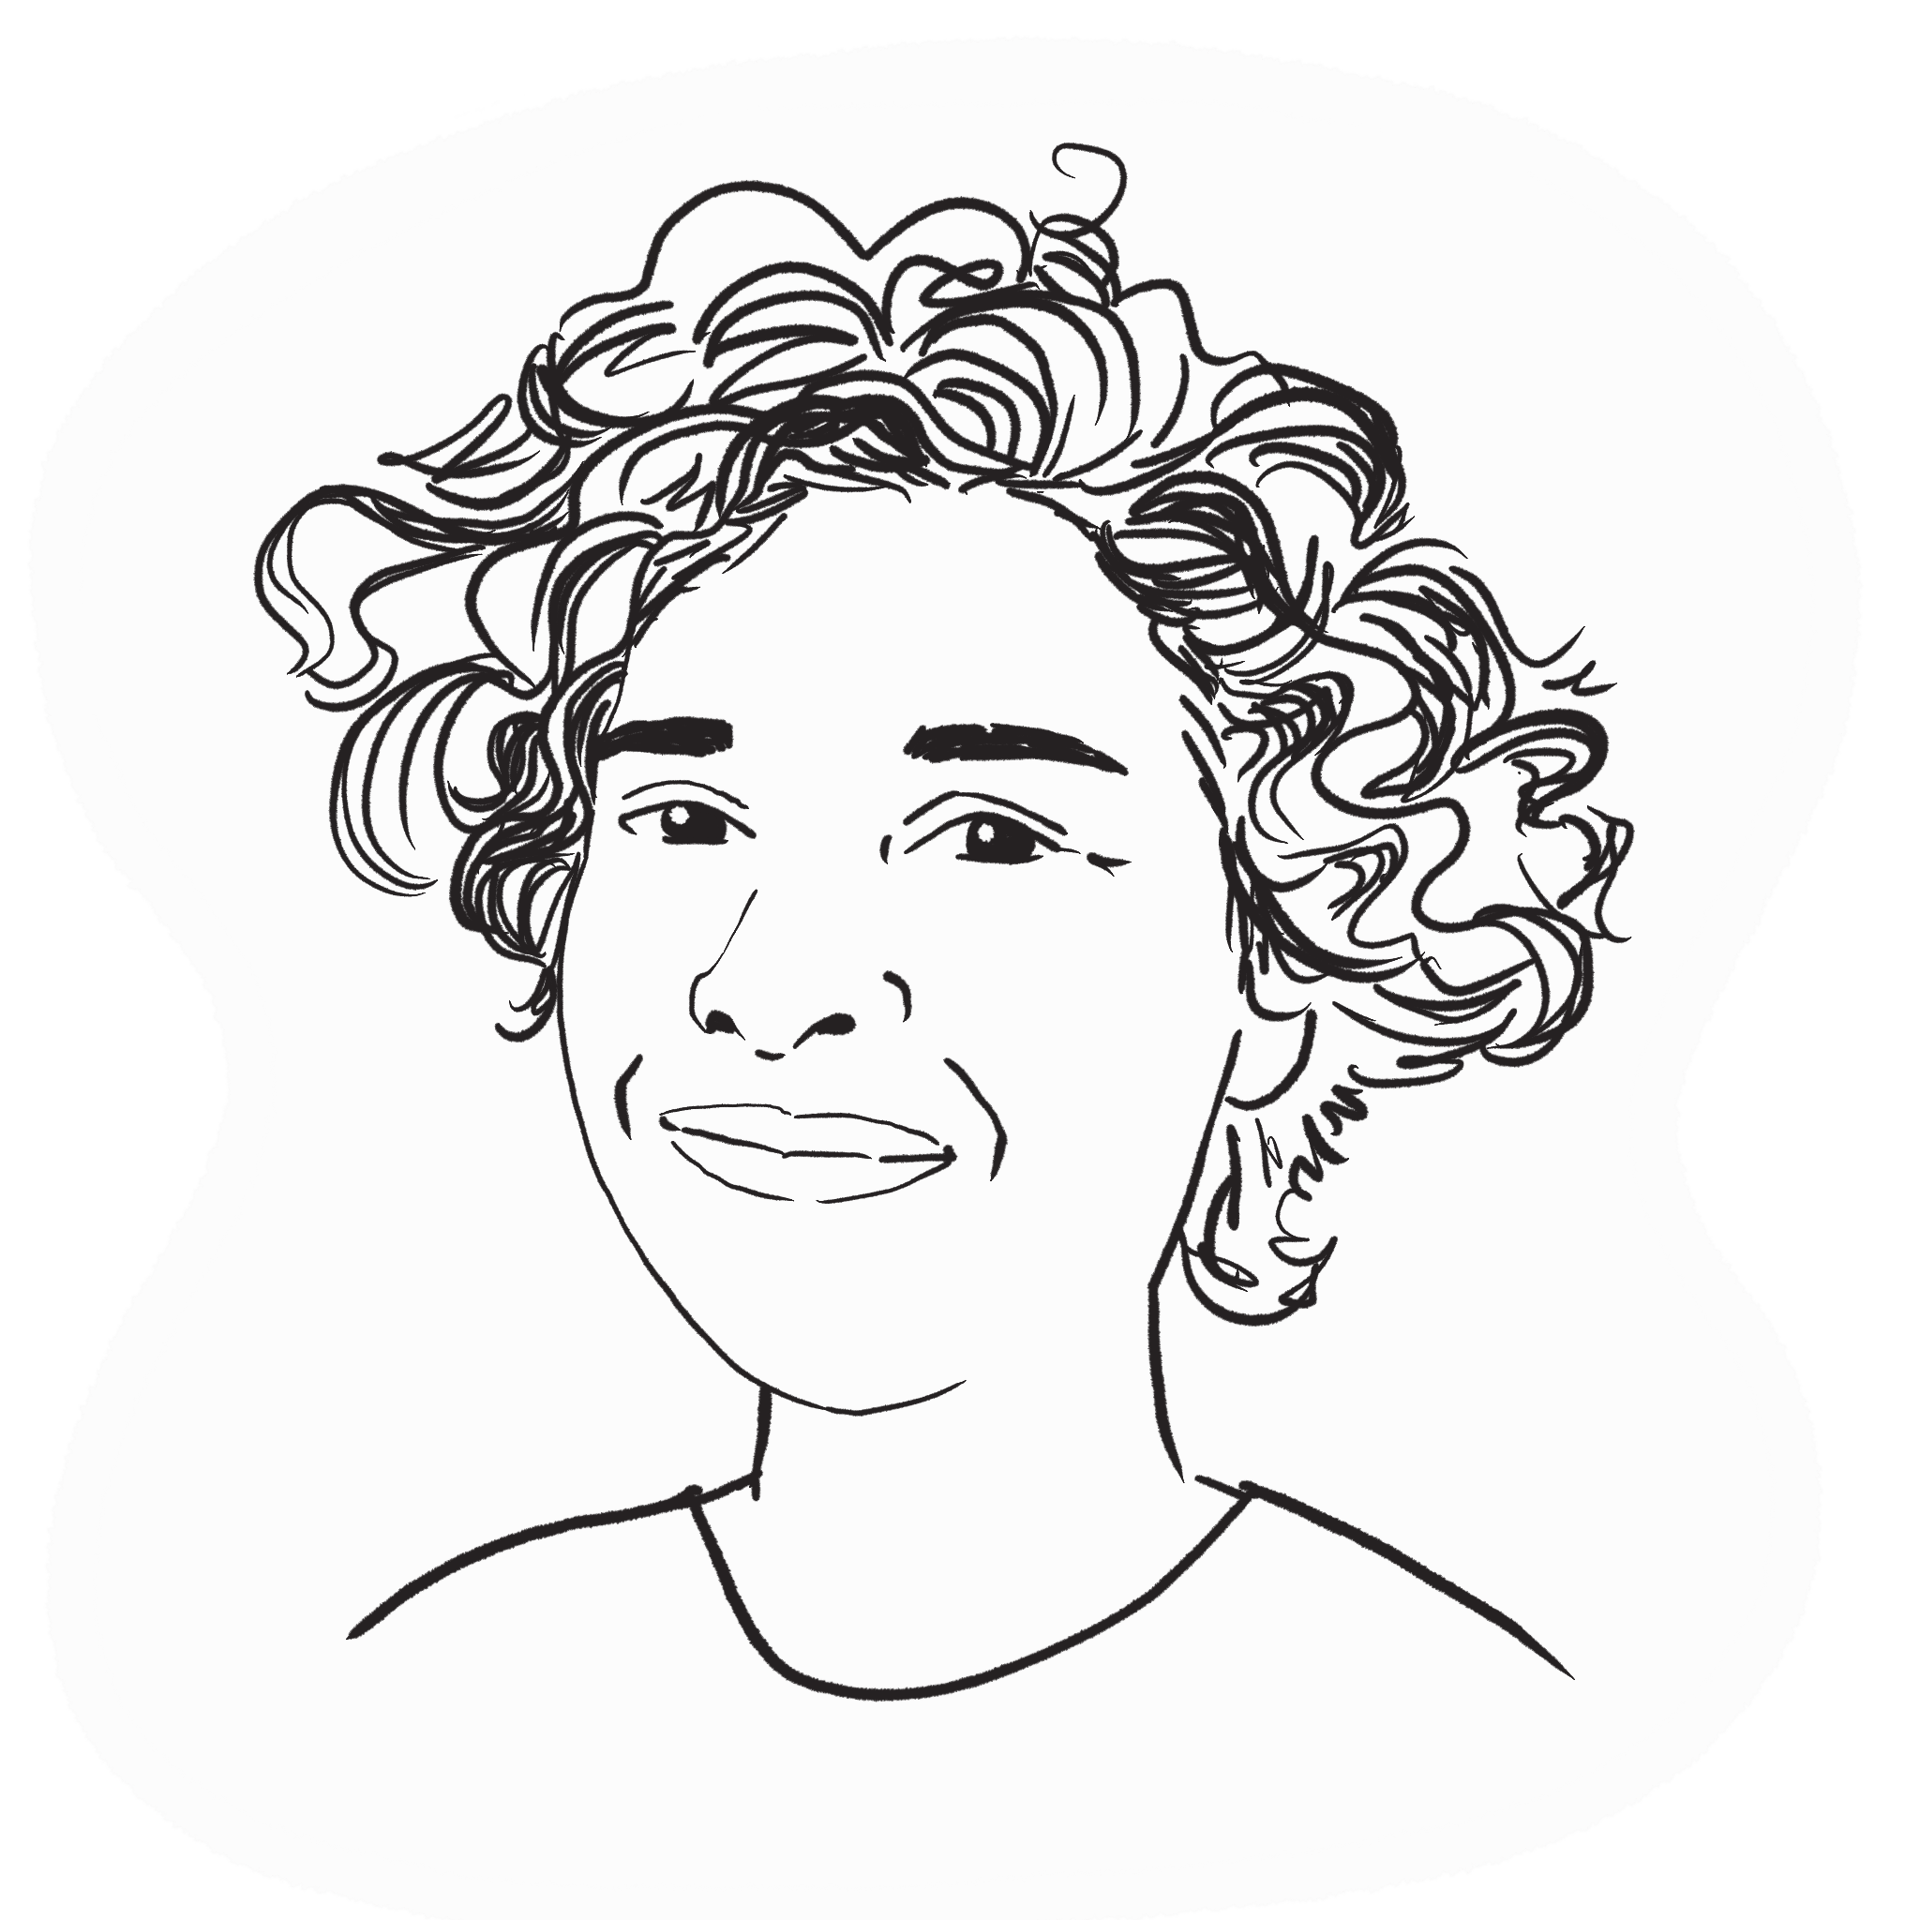 Illustration of an anonymous person - a woman with short curly hair